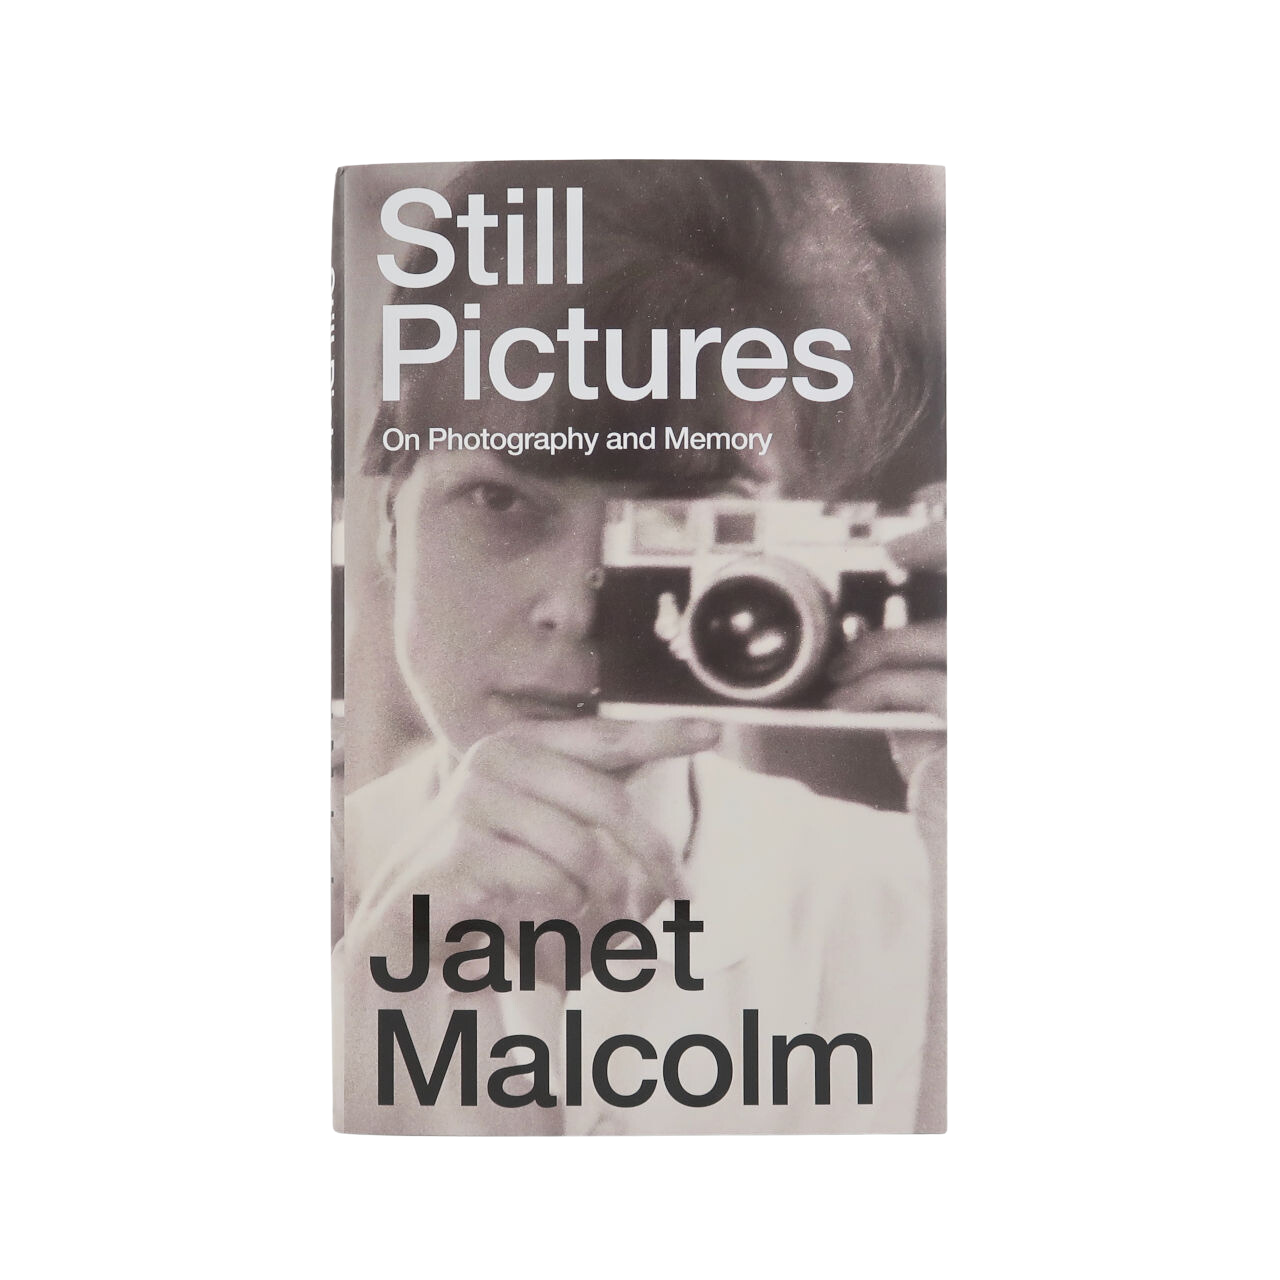 Granta Still Pictures On Photography and Memory Book by Janet Malcolm